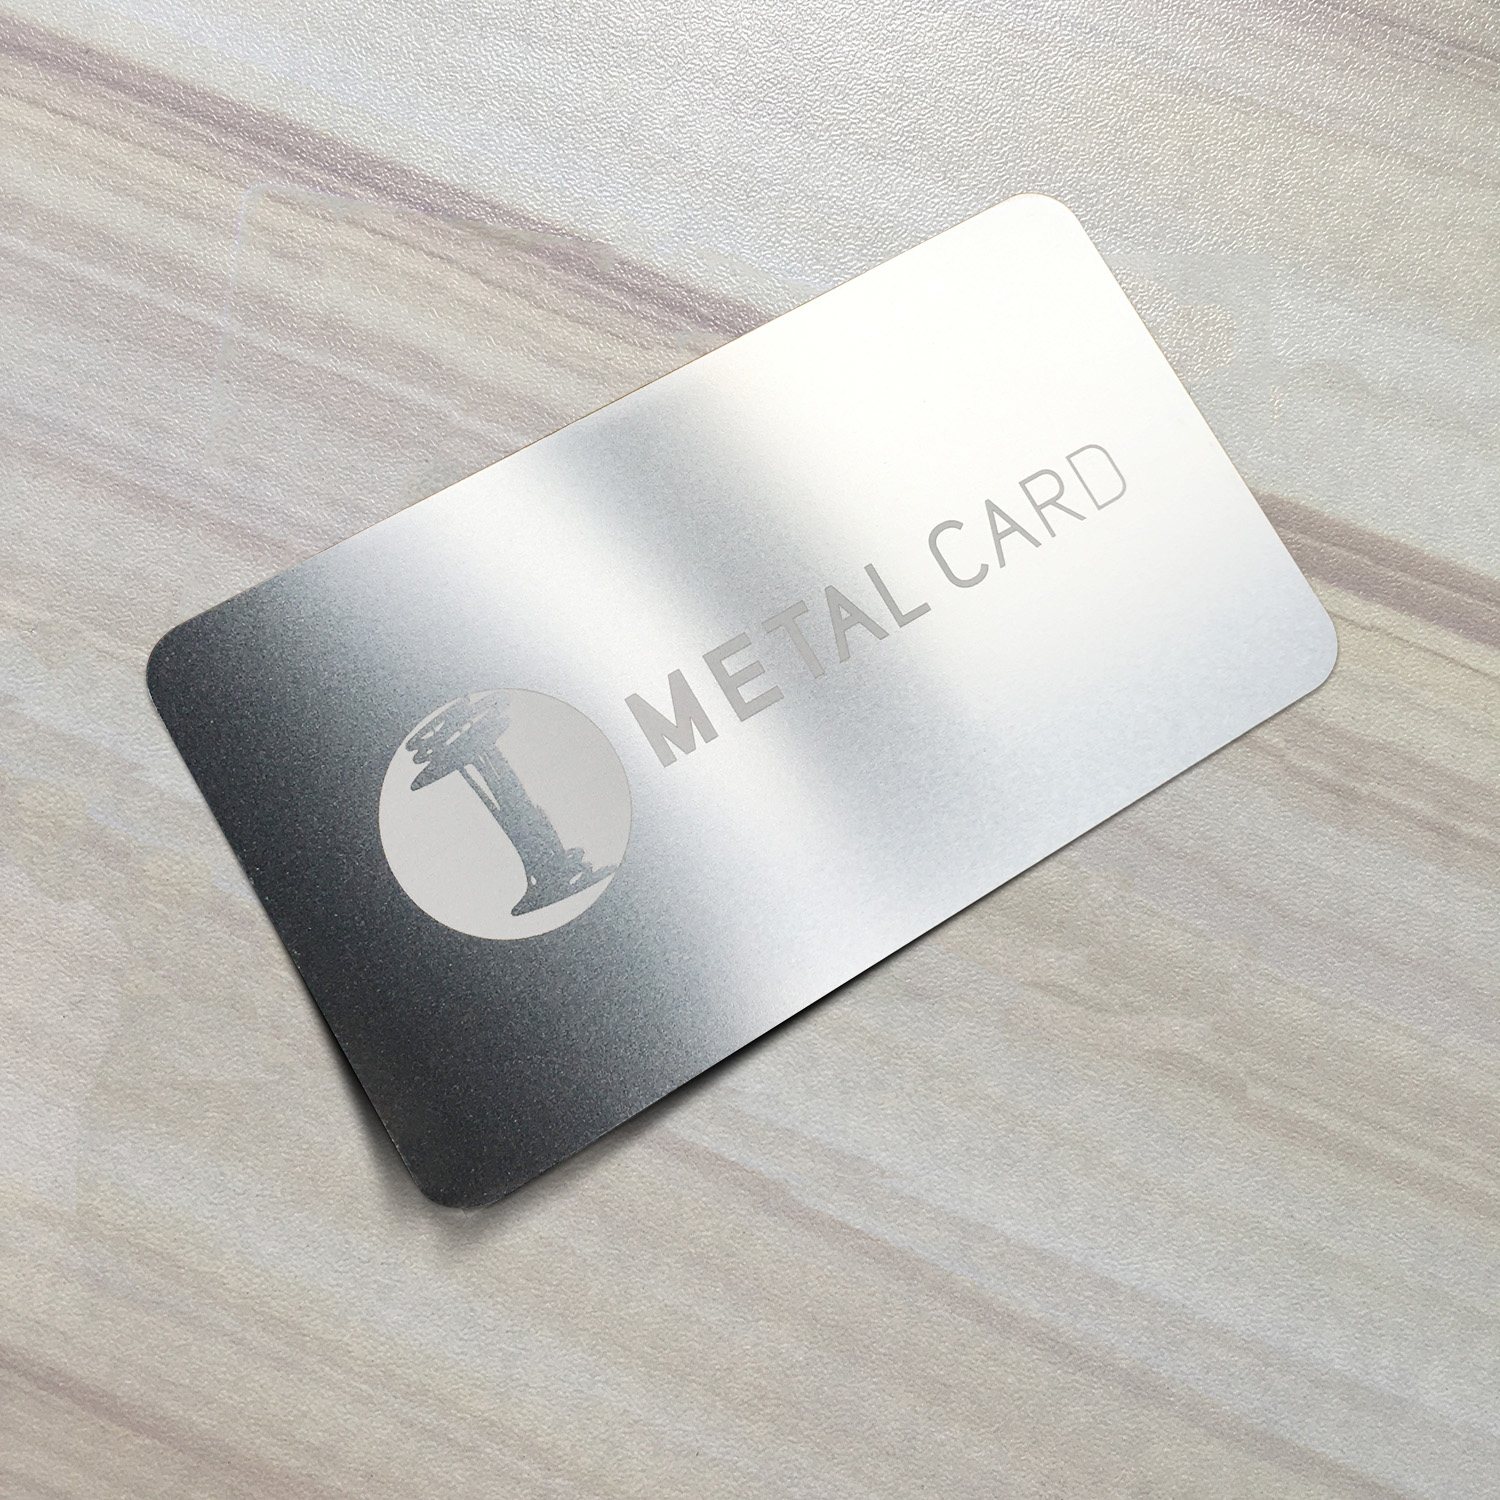 Stainless steel laser engraved business card